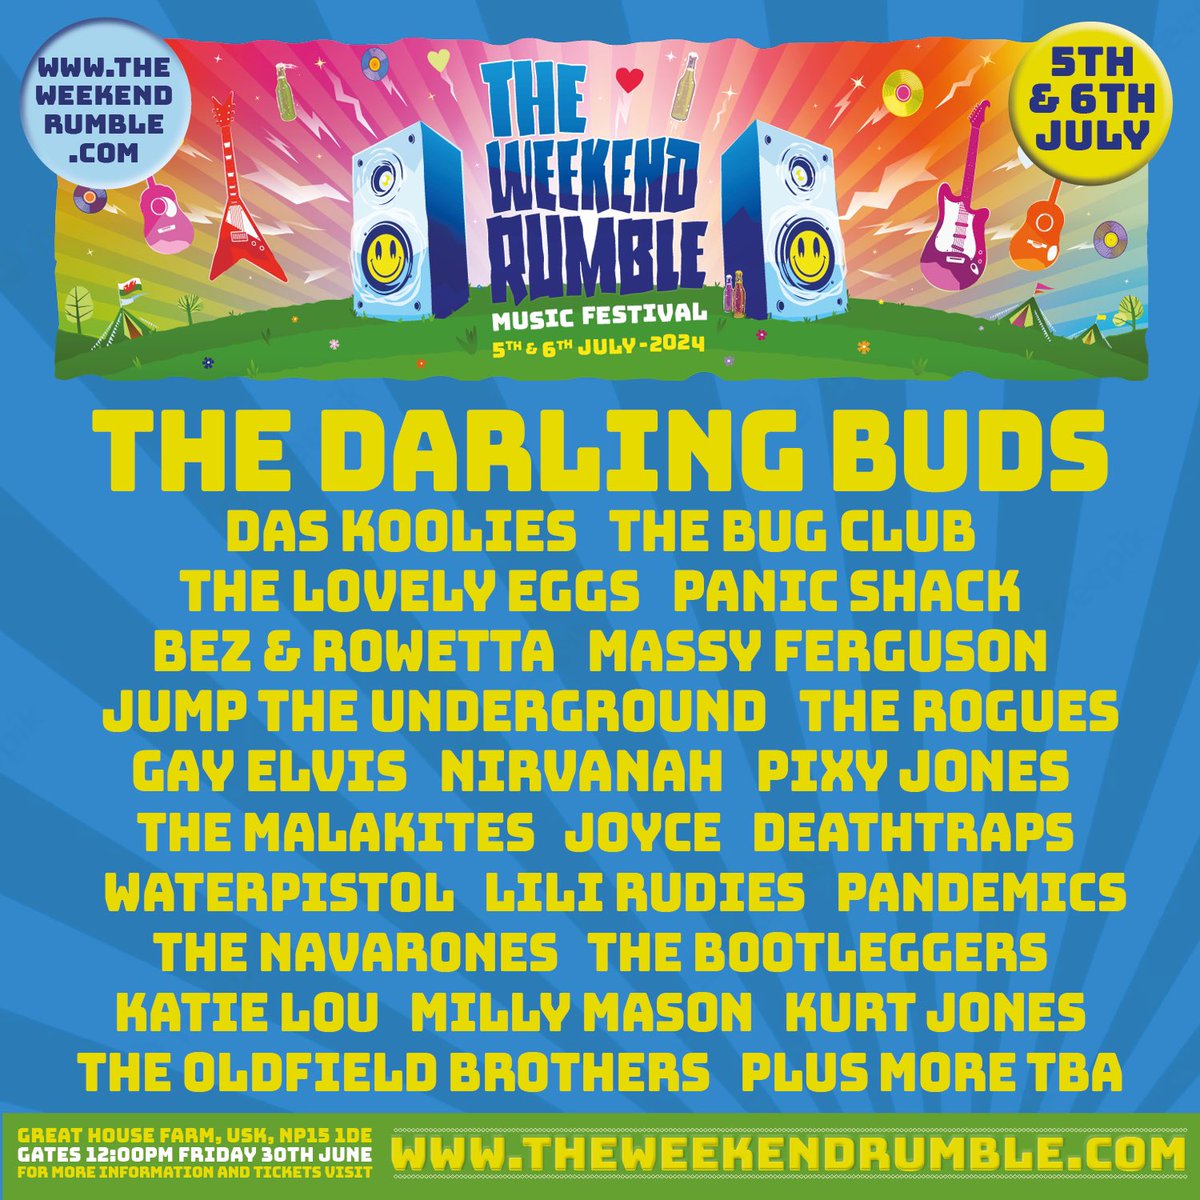 'The Weekend Rumble is an independent music festival weekend held in the beautiful countryside of Usk, South Wales, 5th & 6th July 2024. Join us for some great food, great views, great music, top dancing and glamourous barn based fun. Grab your tickets at theweekendrumble.com'